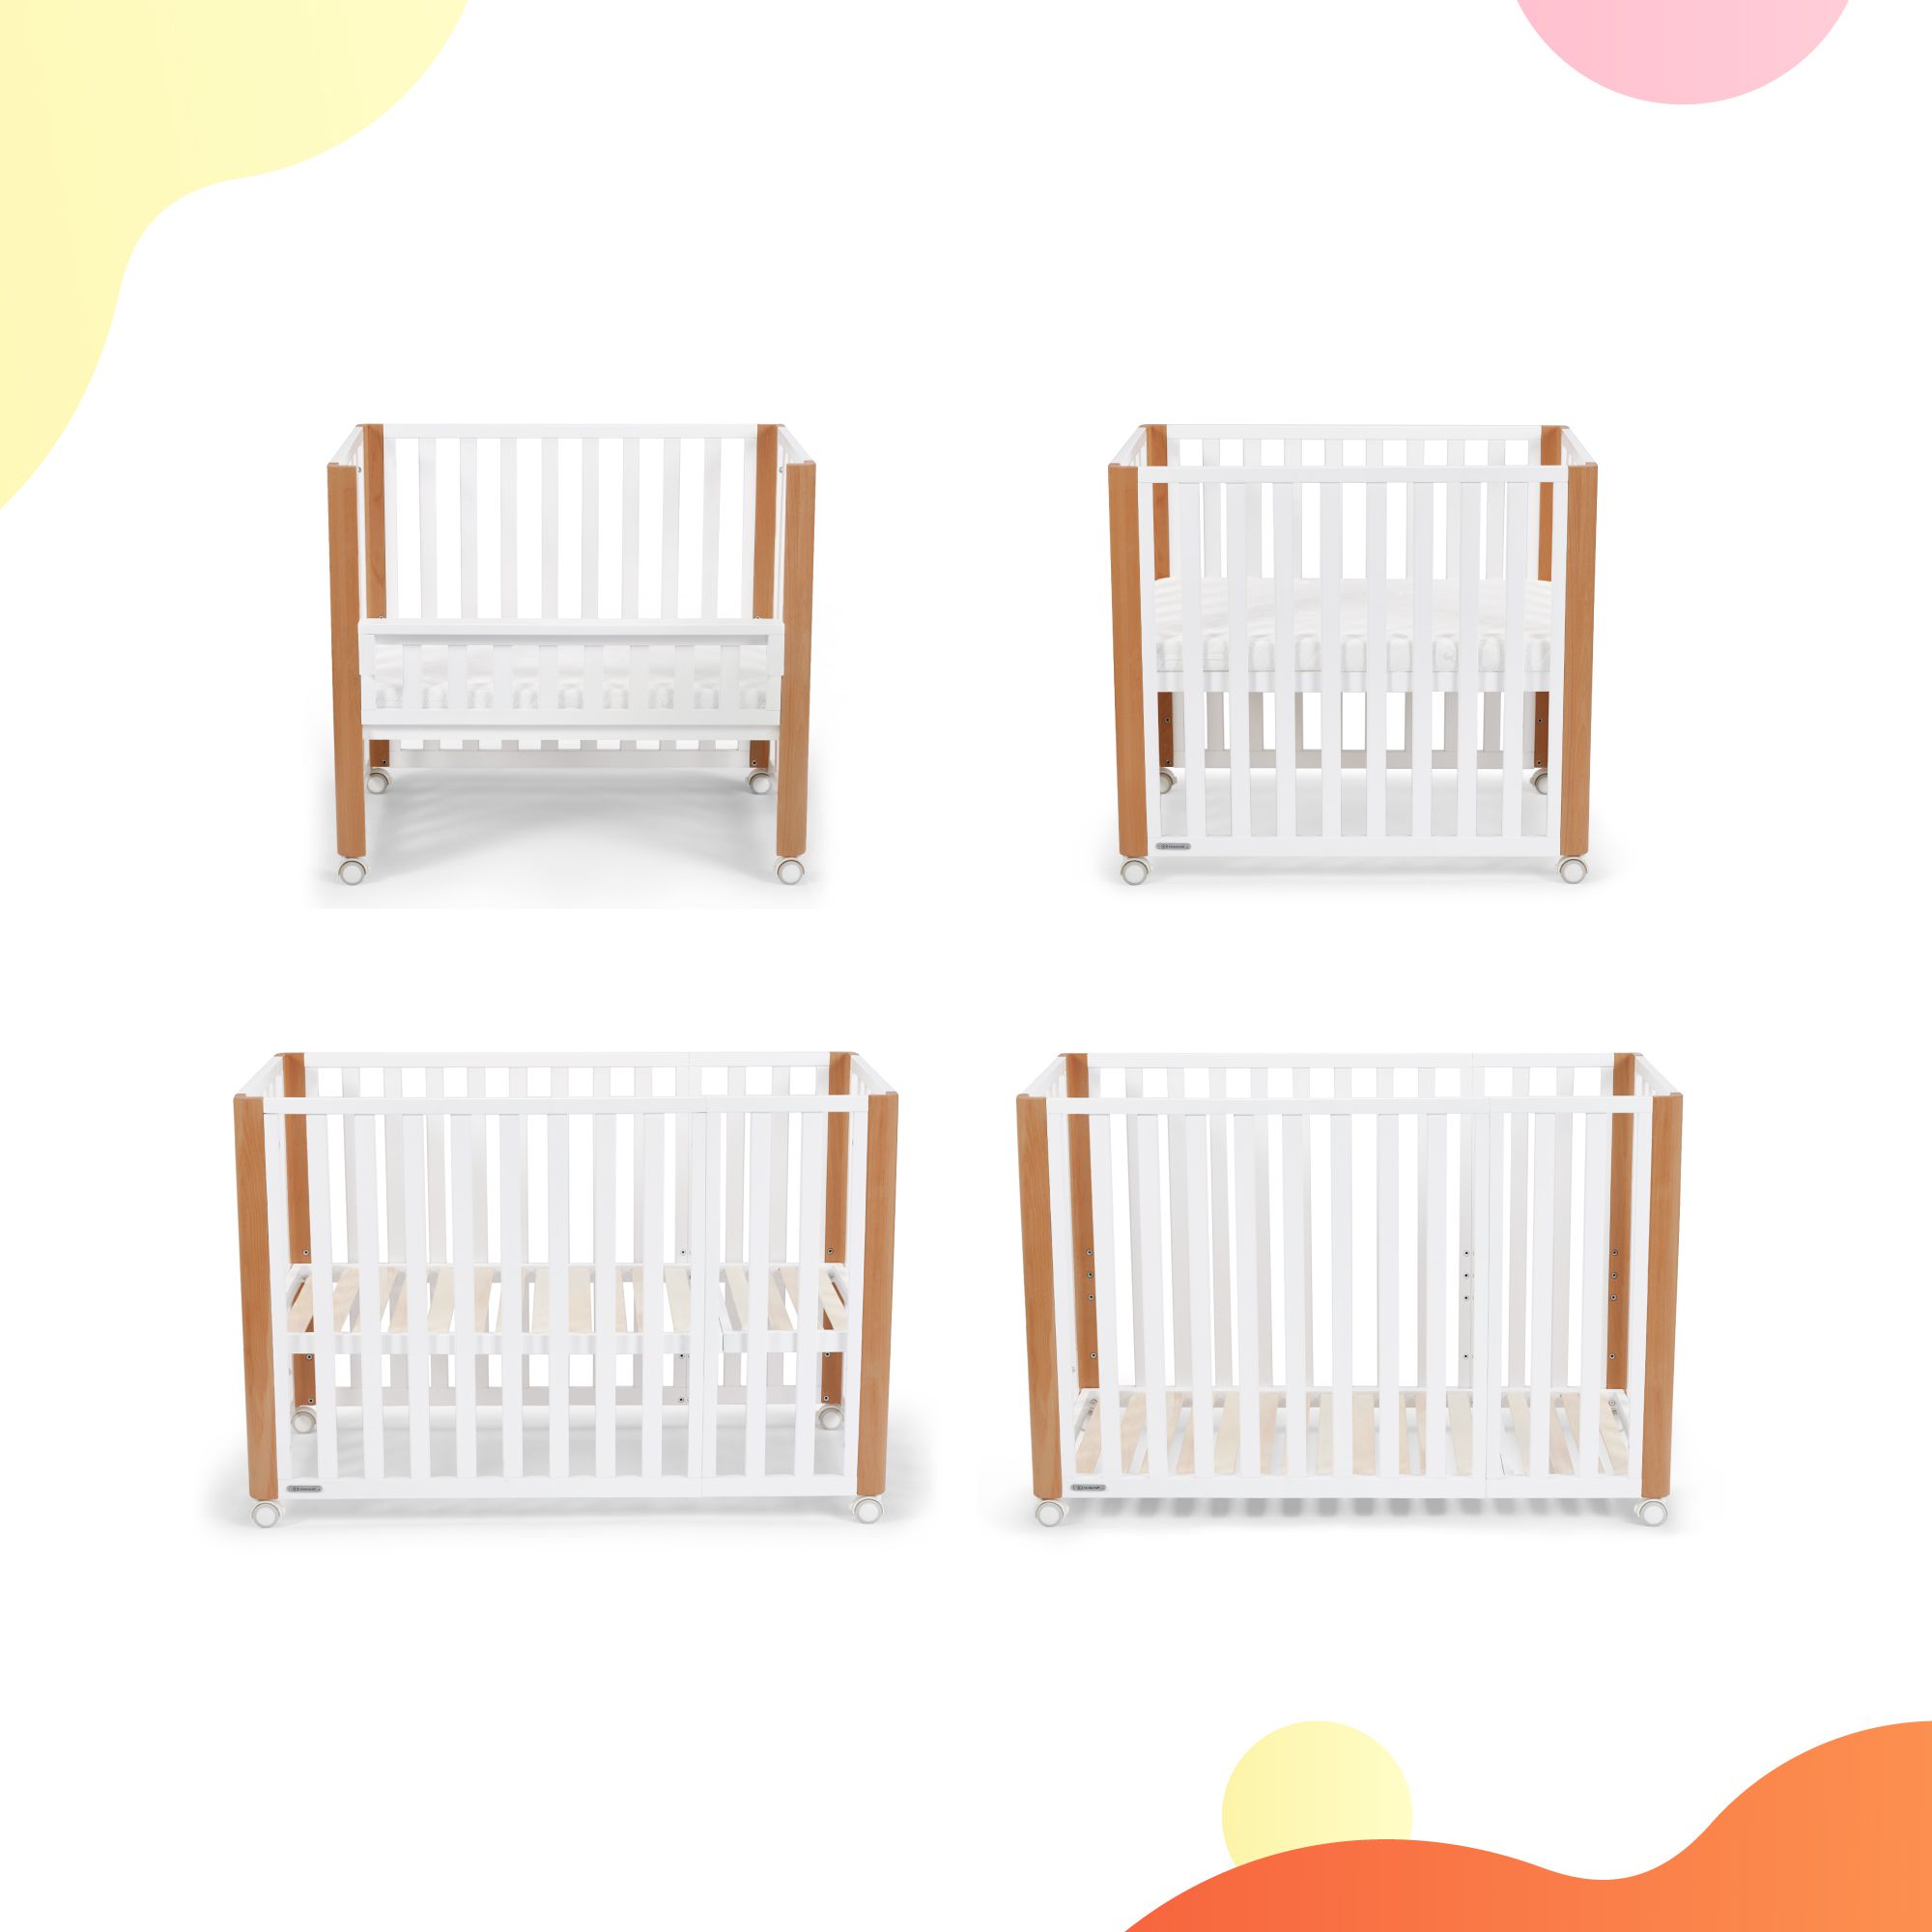 A 4-in-1 baby cot